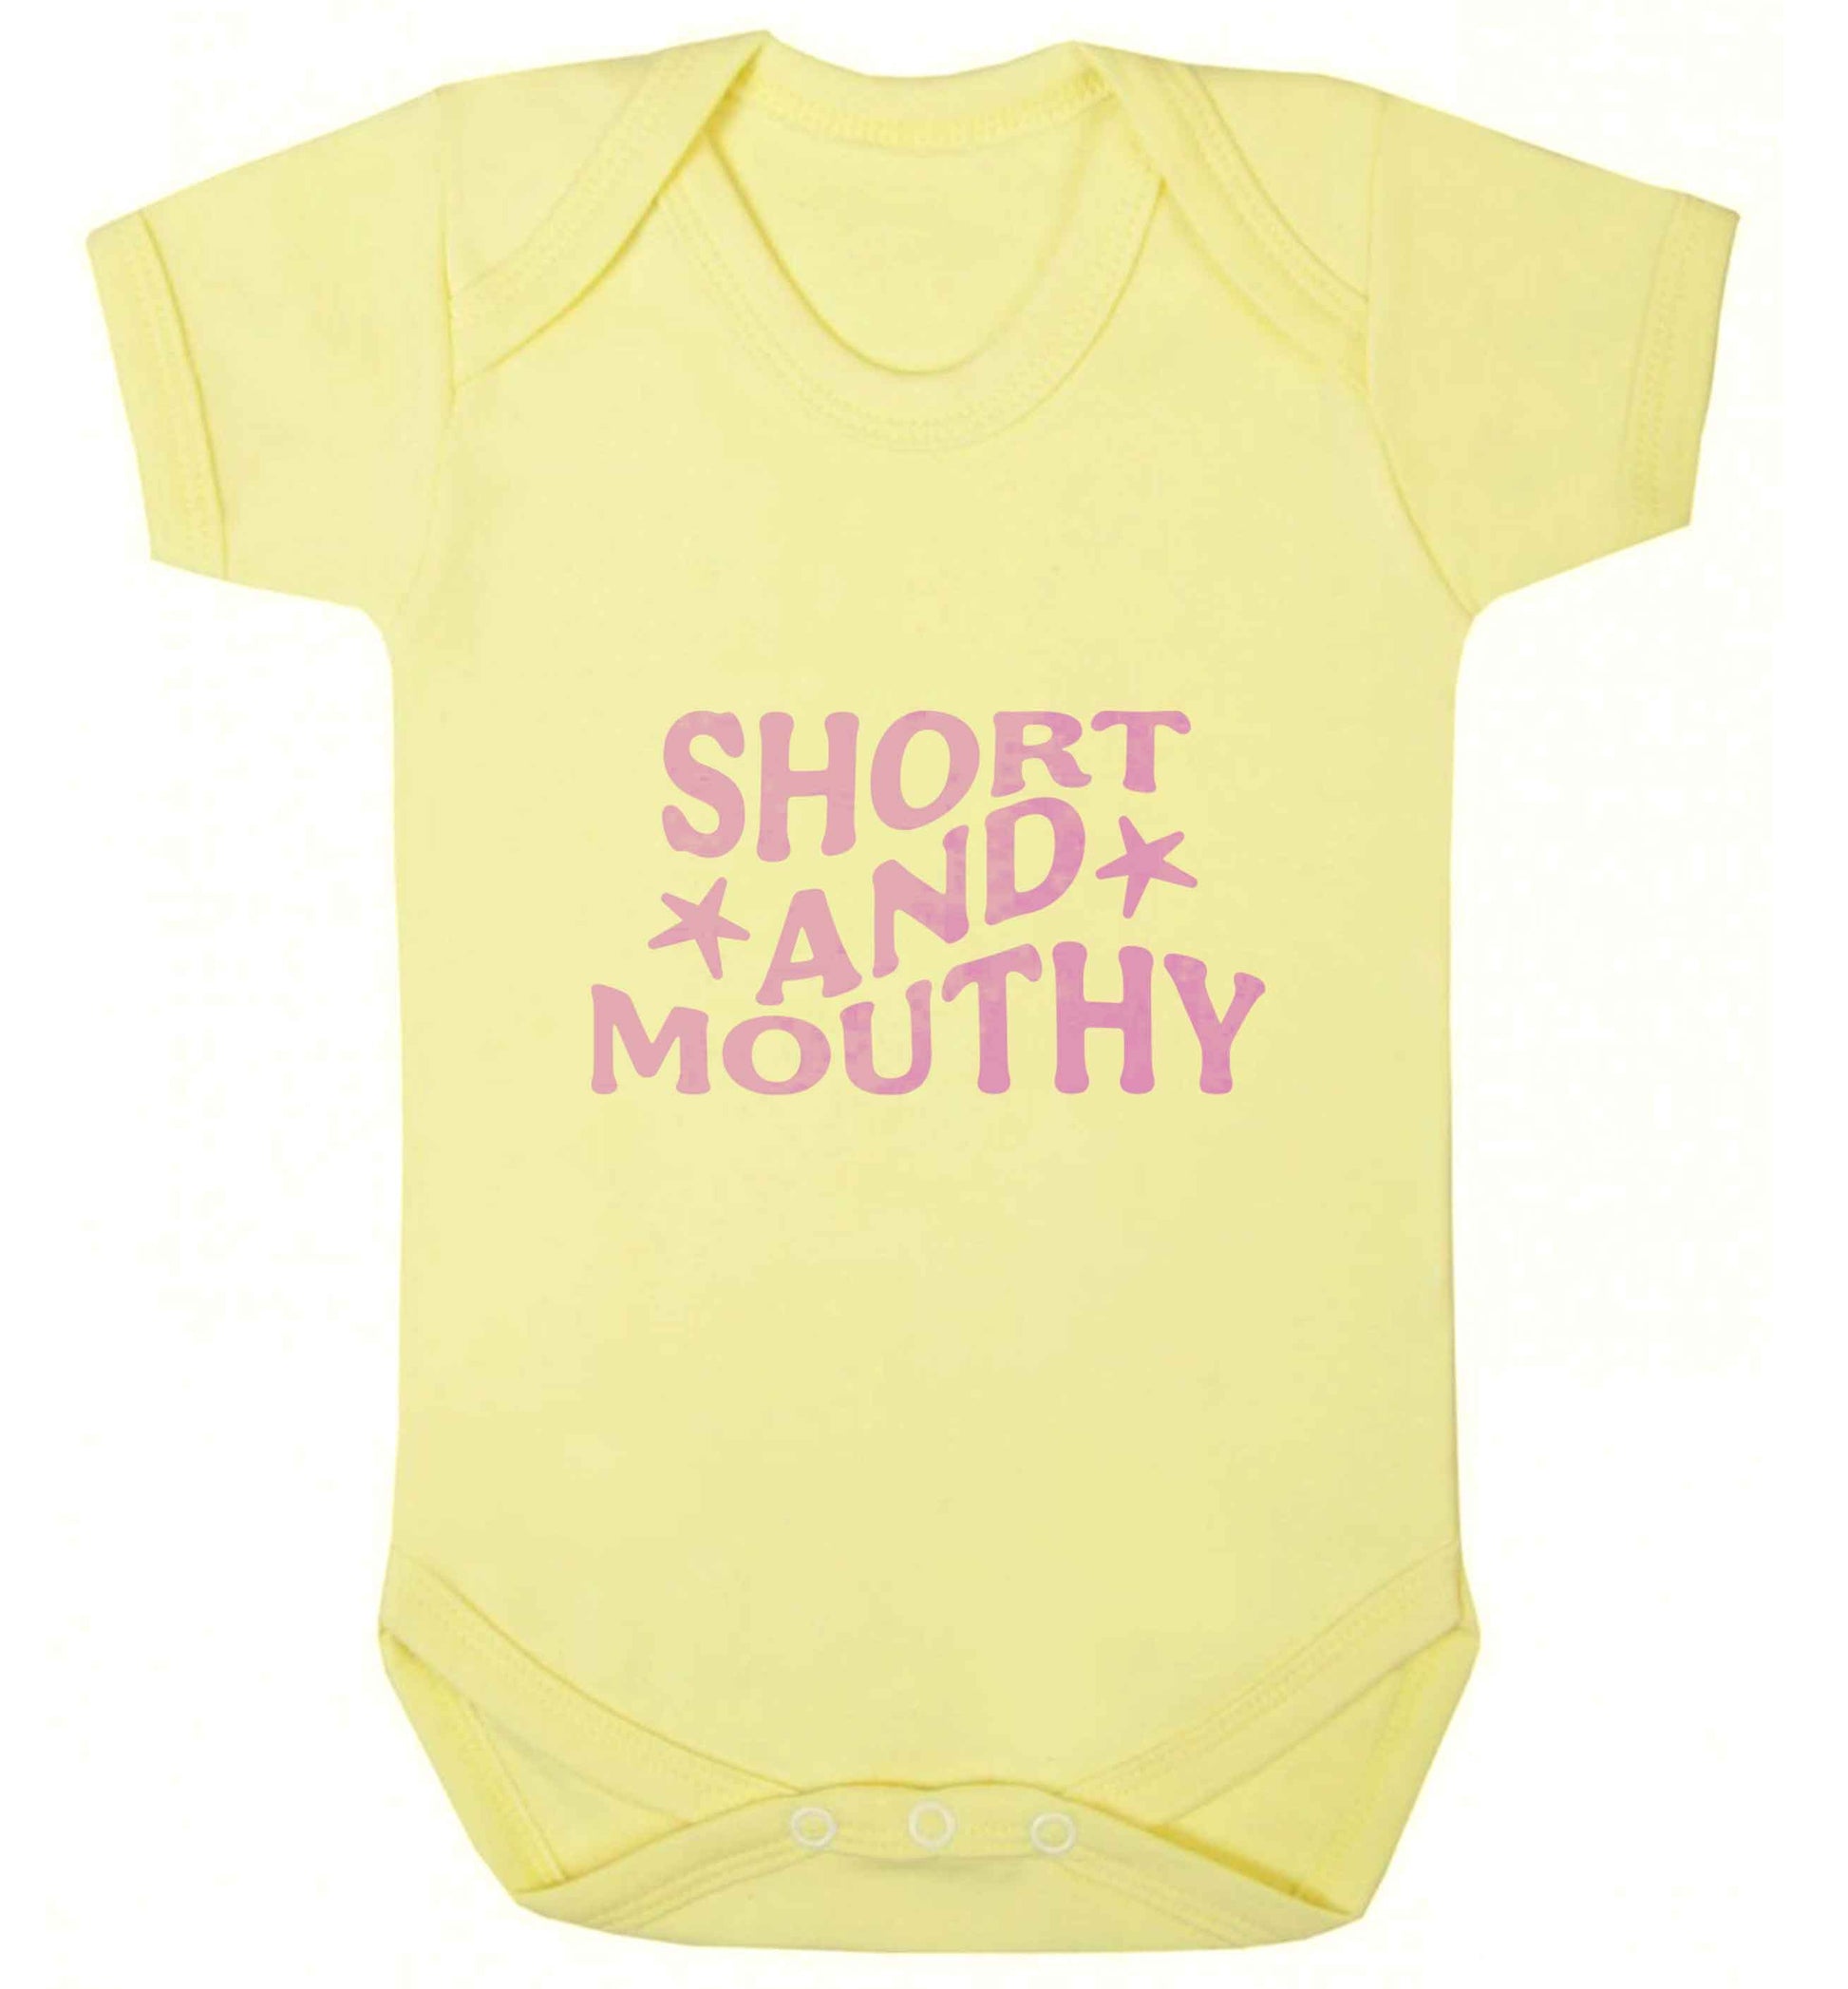 Short and mouthy baby vest pale yellow 18-24 months